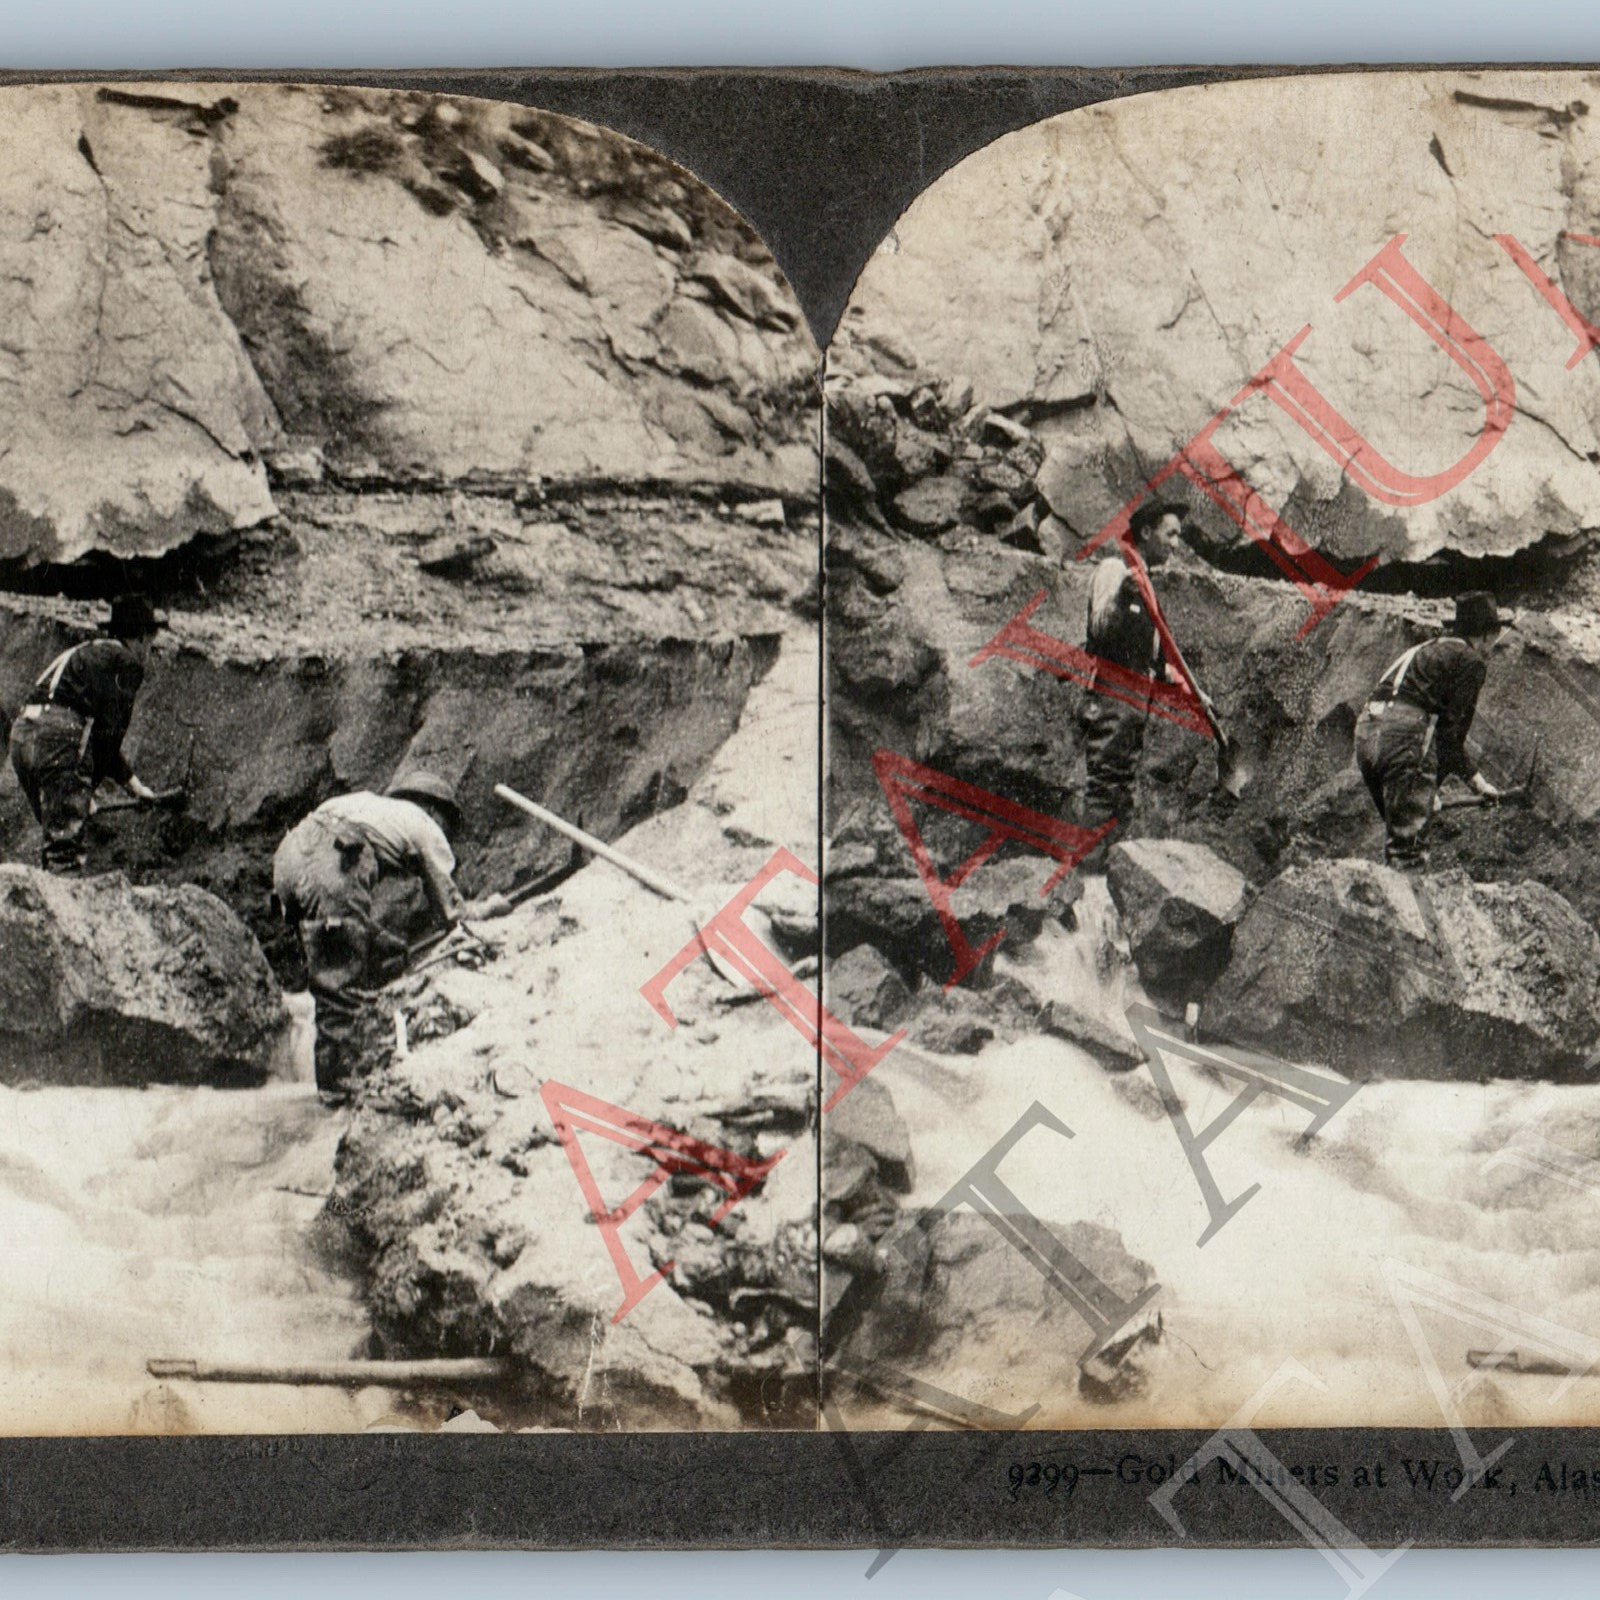 c1900s Alaska Gold Miners Dig Mining Real Photo Stereoview Sift Sand Riches V45